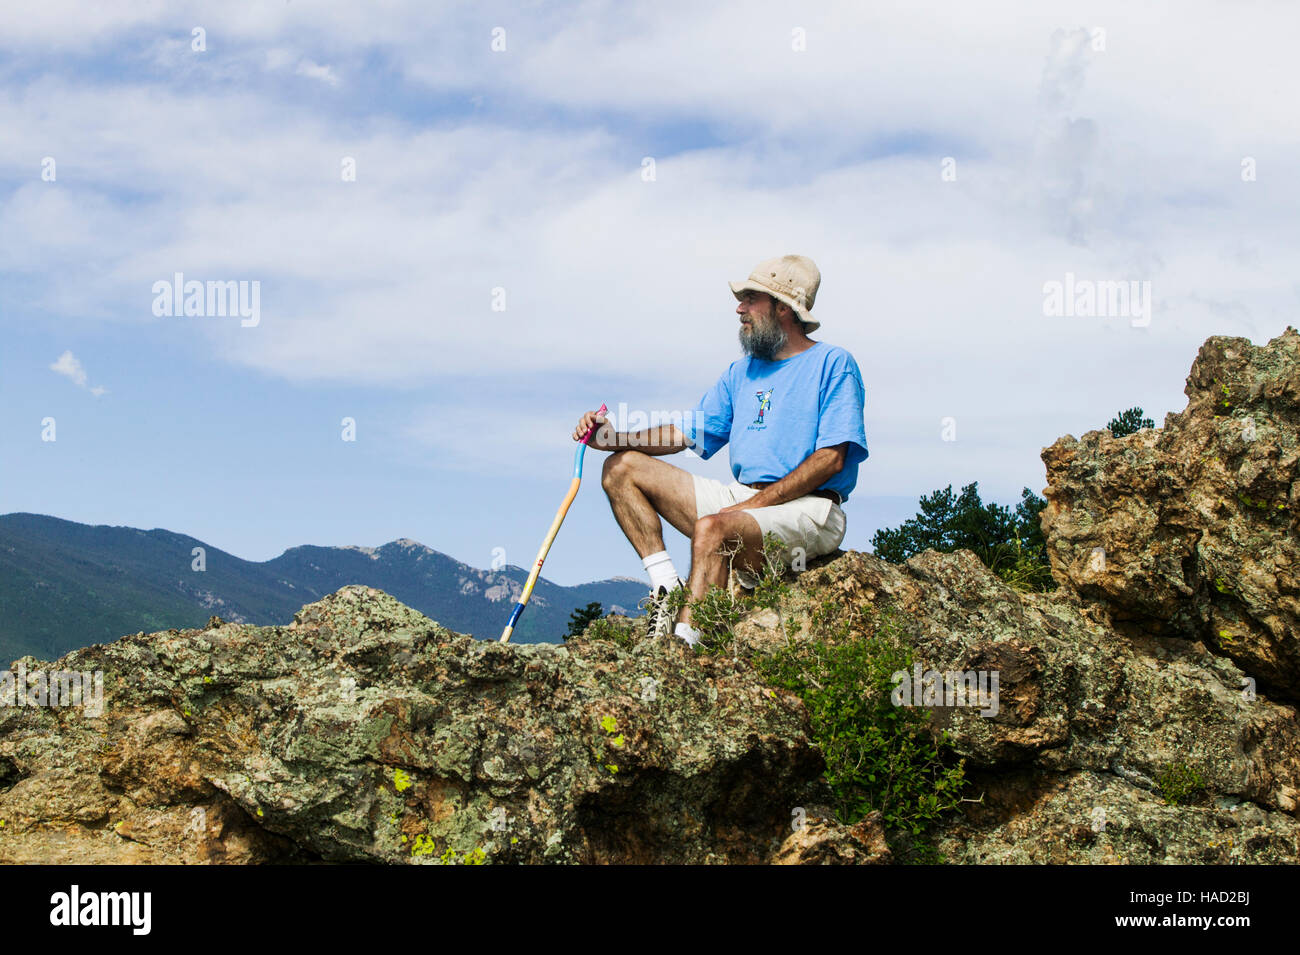 Portrait of middle aged man with the Colorado Rocky mountains beyond Stock Photo